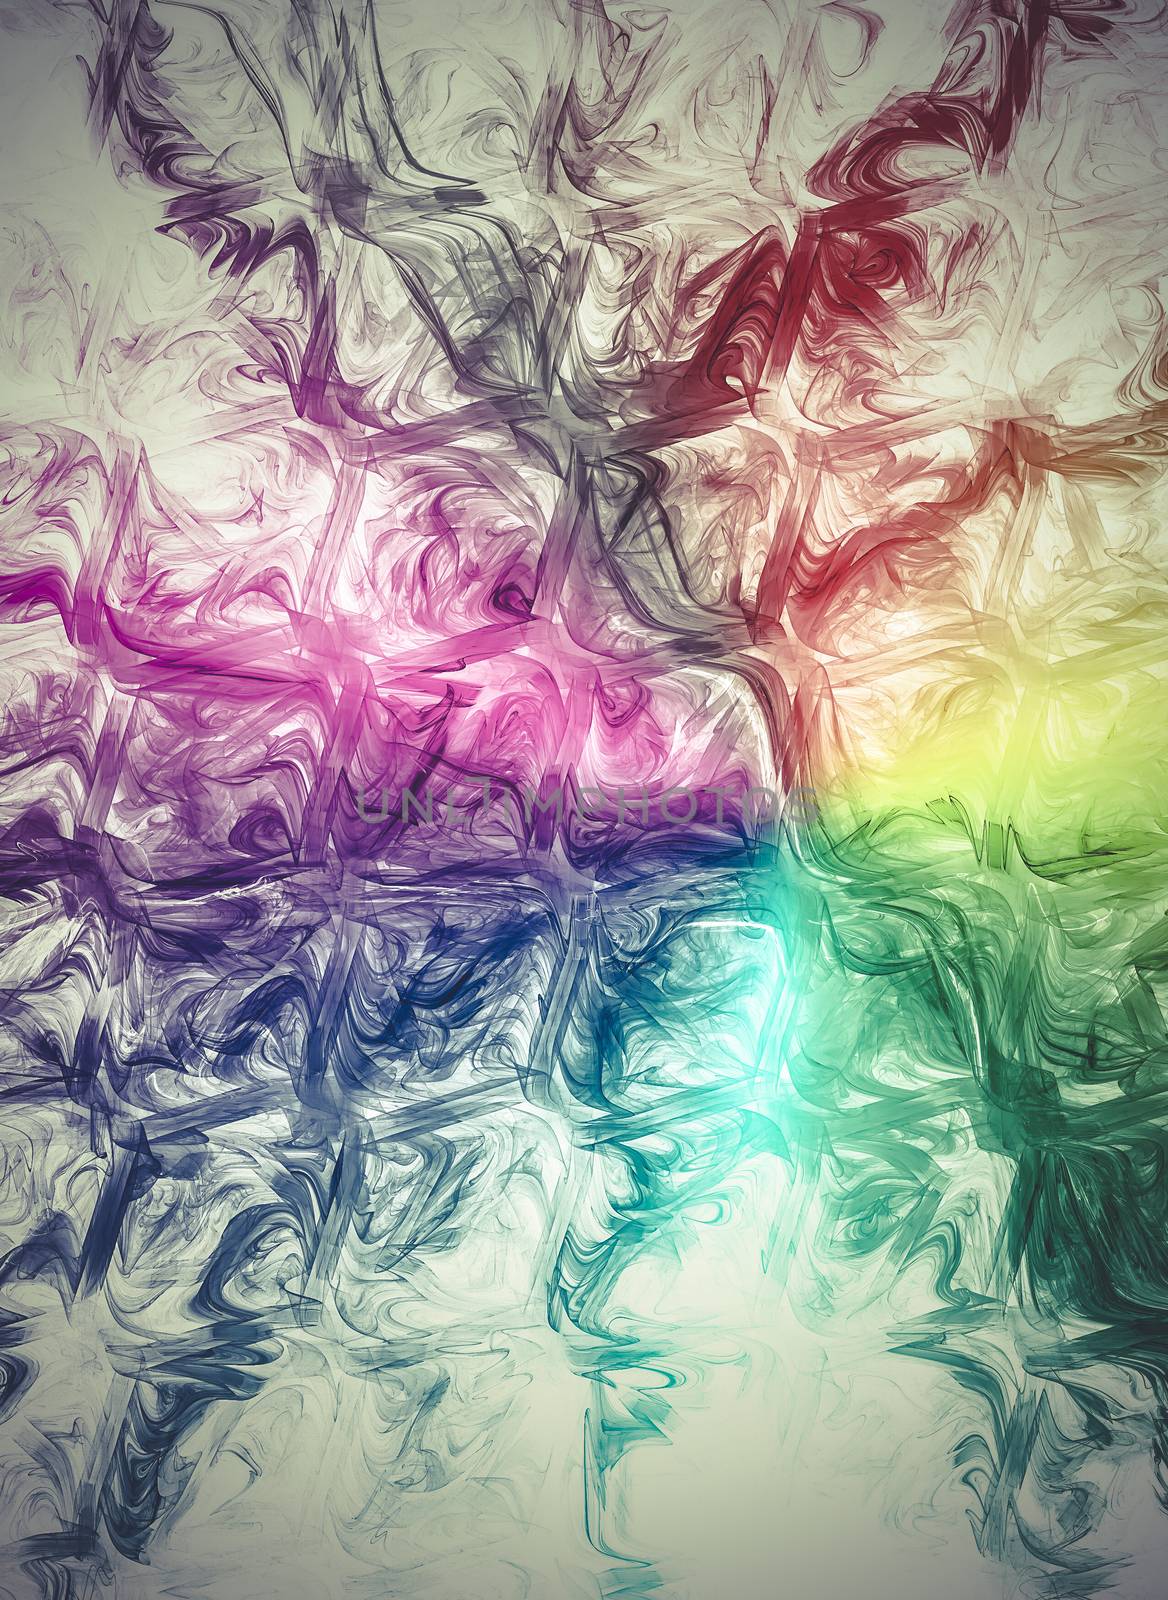 Energy, Creative design background, fractal styles with color de by FernandoCortes